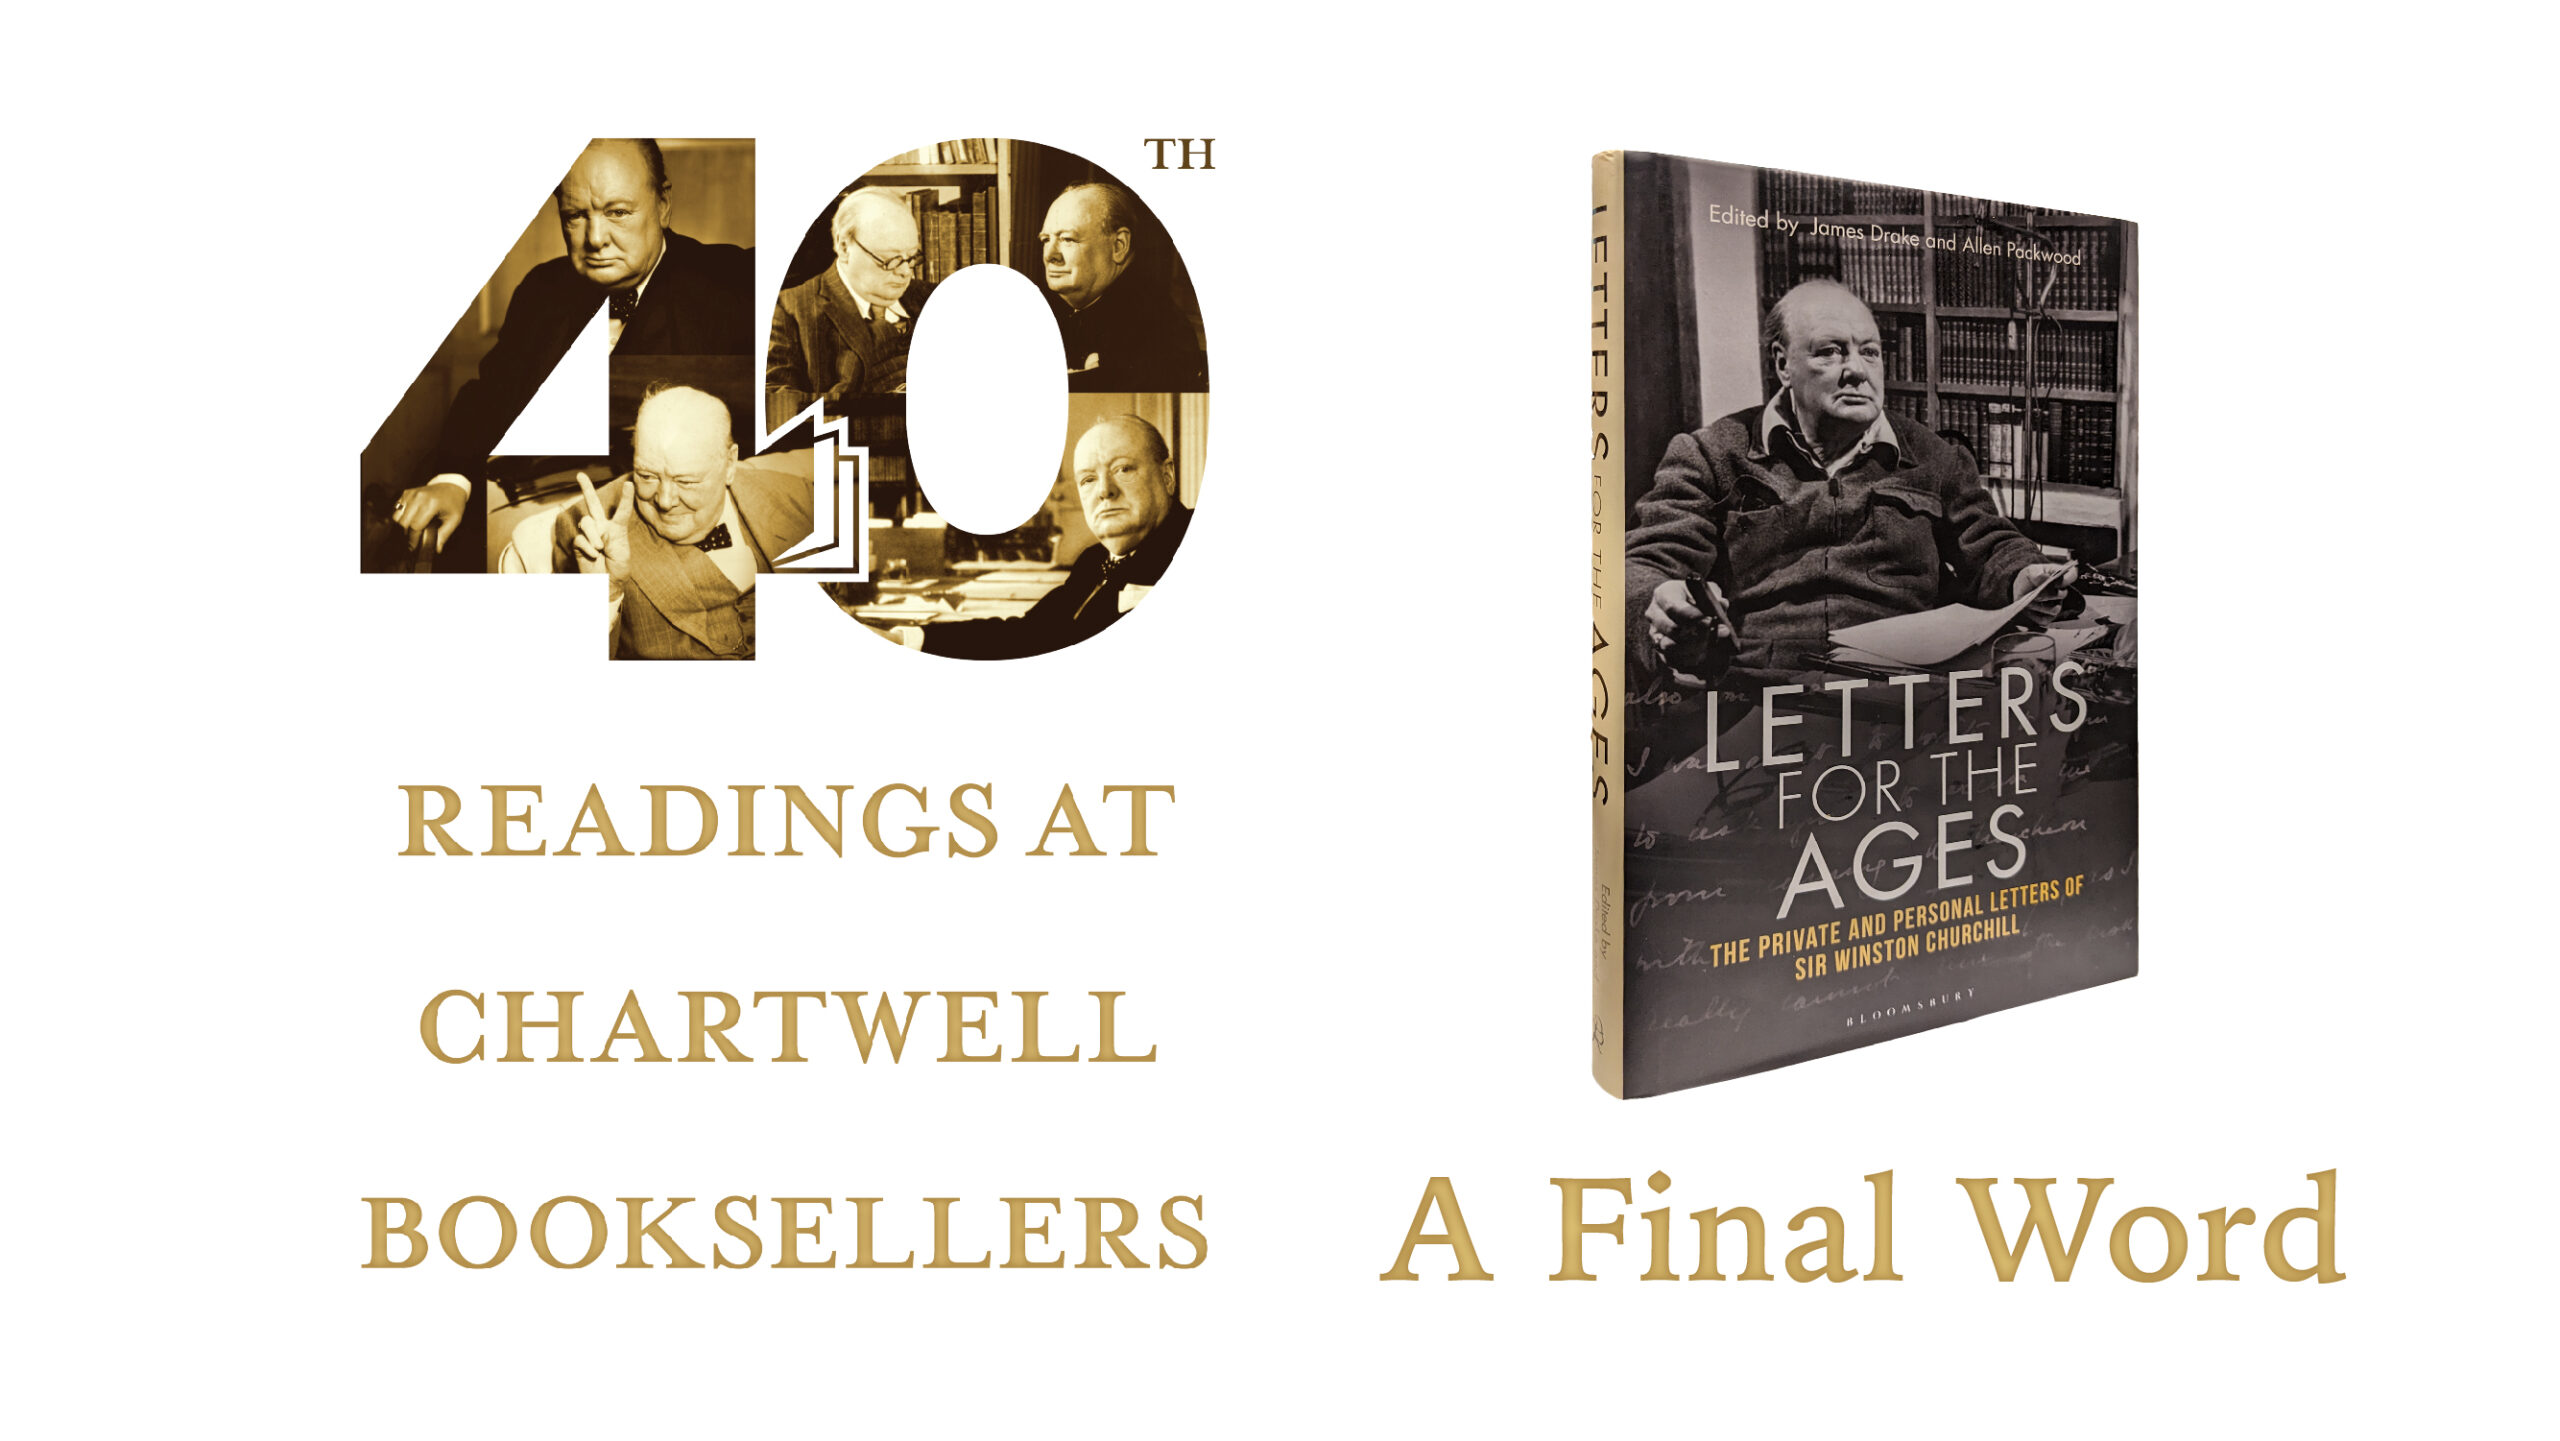 ’40TH READINGS AT CHARTWELL BOOKSELLERS’ FINIS: A FINAL WORD